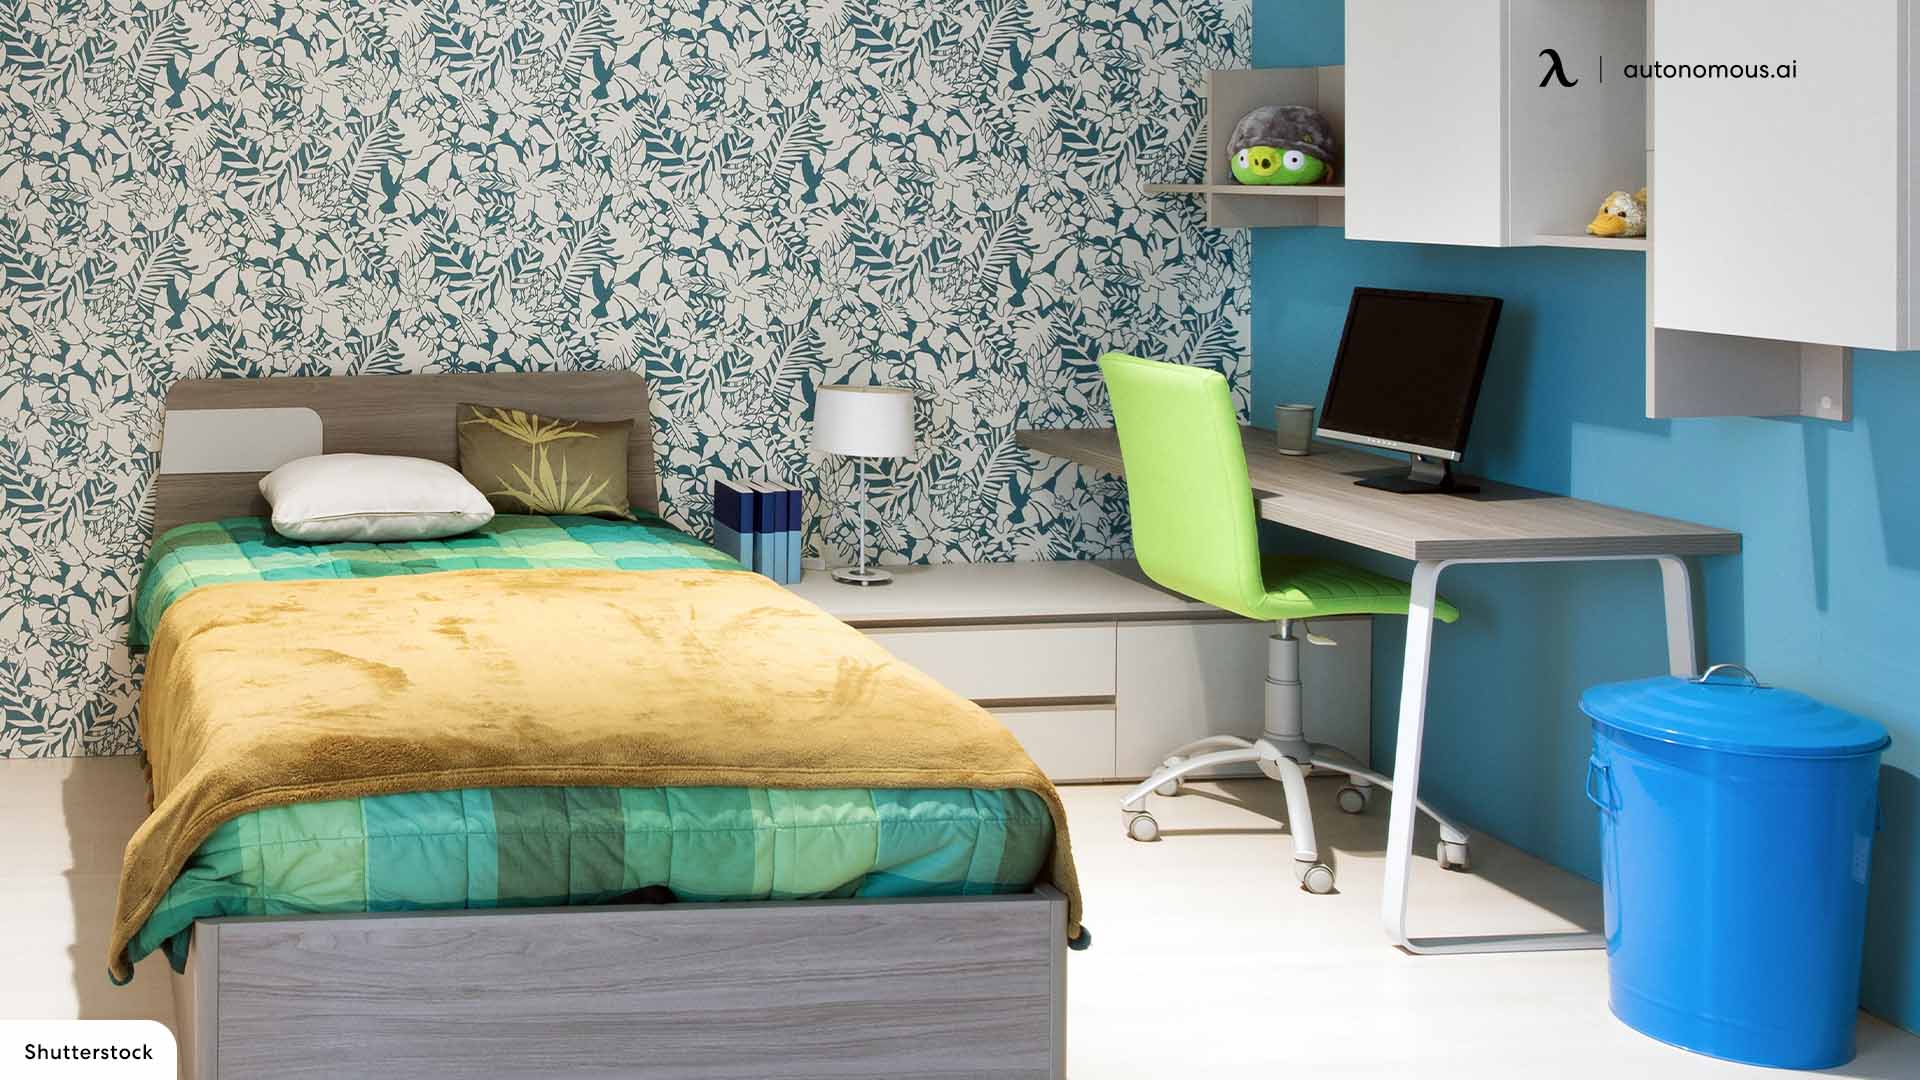 How Do You Fit a Desk in a Small Bedroom?